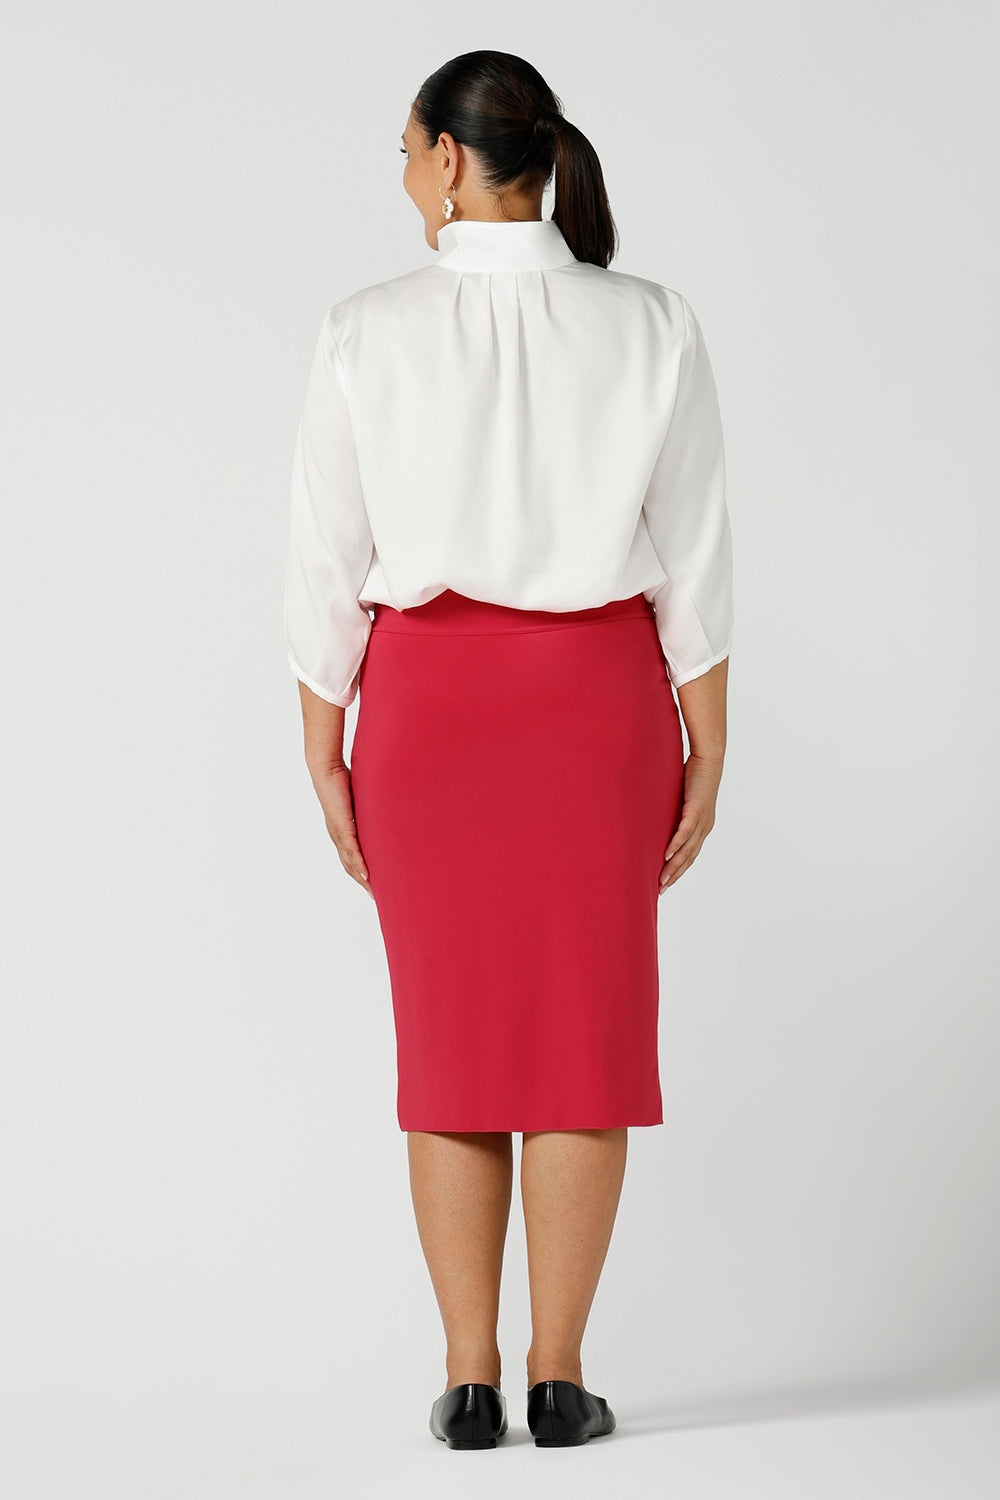 Bcak view of a curvy size 12 Woman wears a fuchsia Andi tube skirt. Styled back with the Arley shirt in white. A bright pop of colour for your workwear wardrobe. Designed and made in Australia for women size 8 - 24.